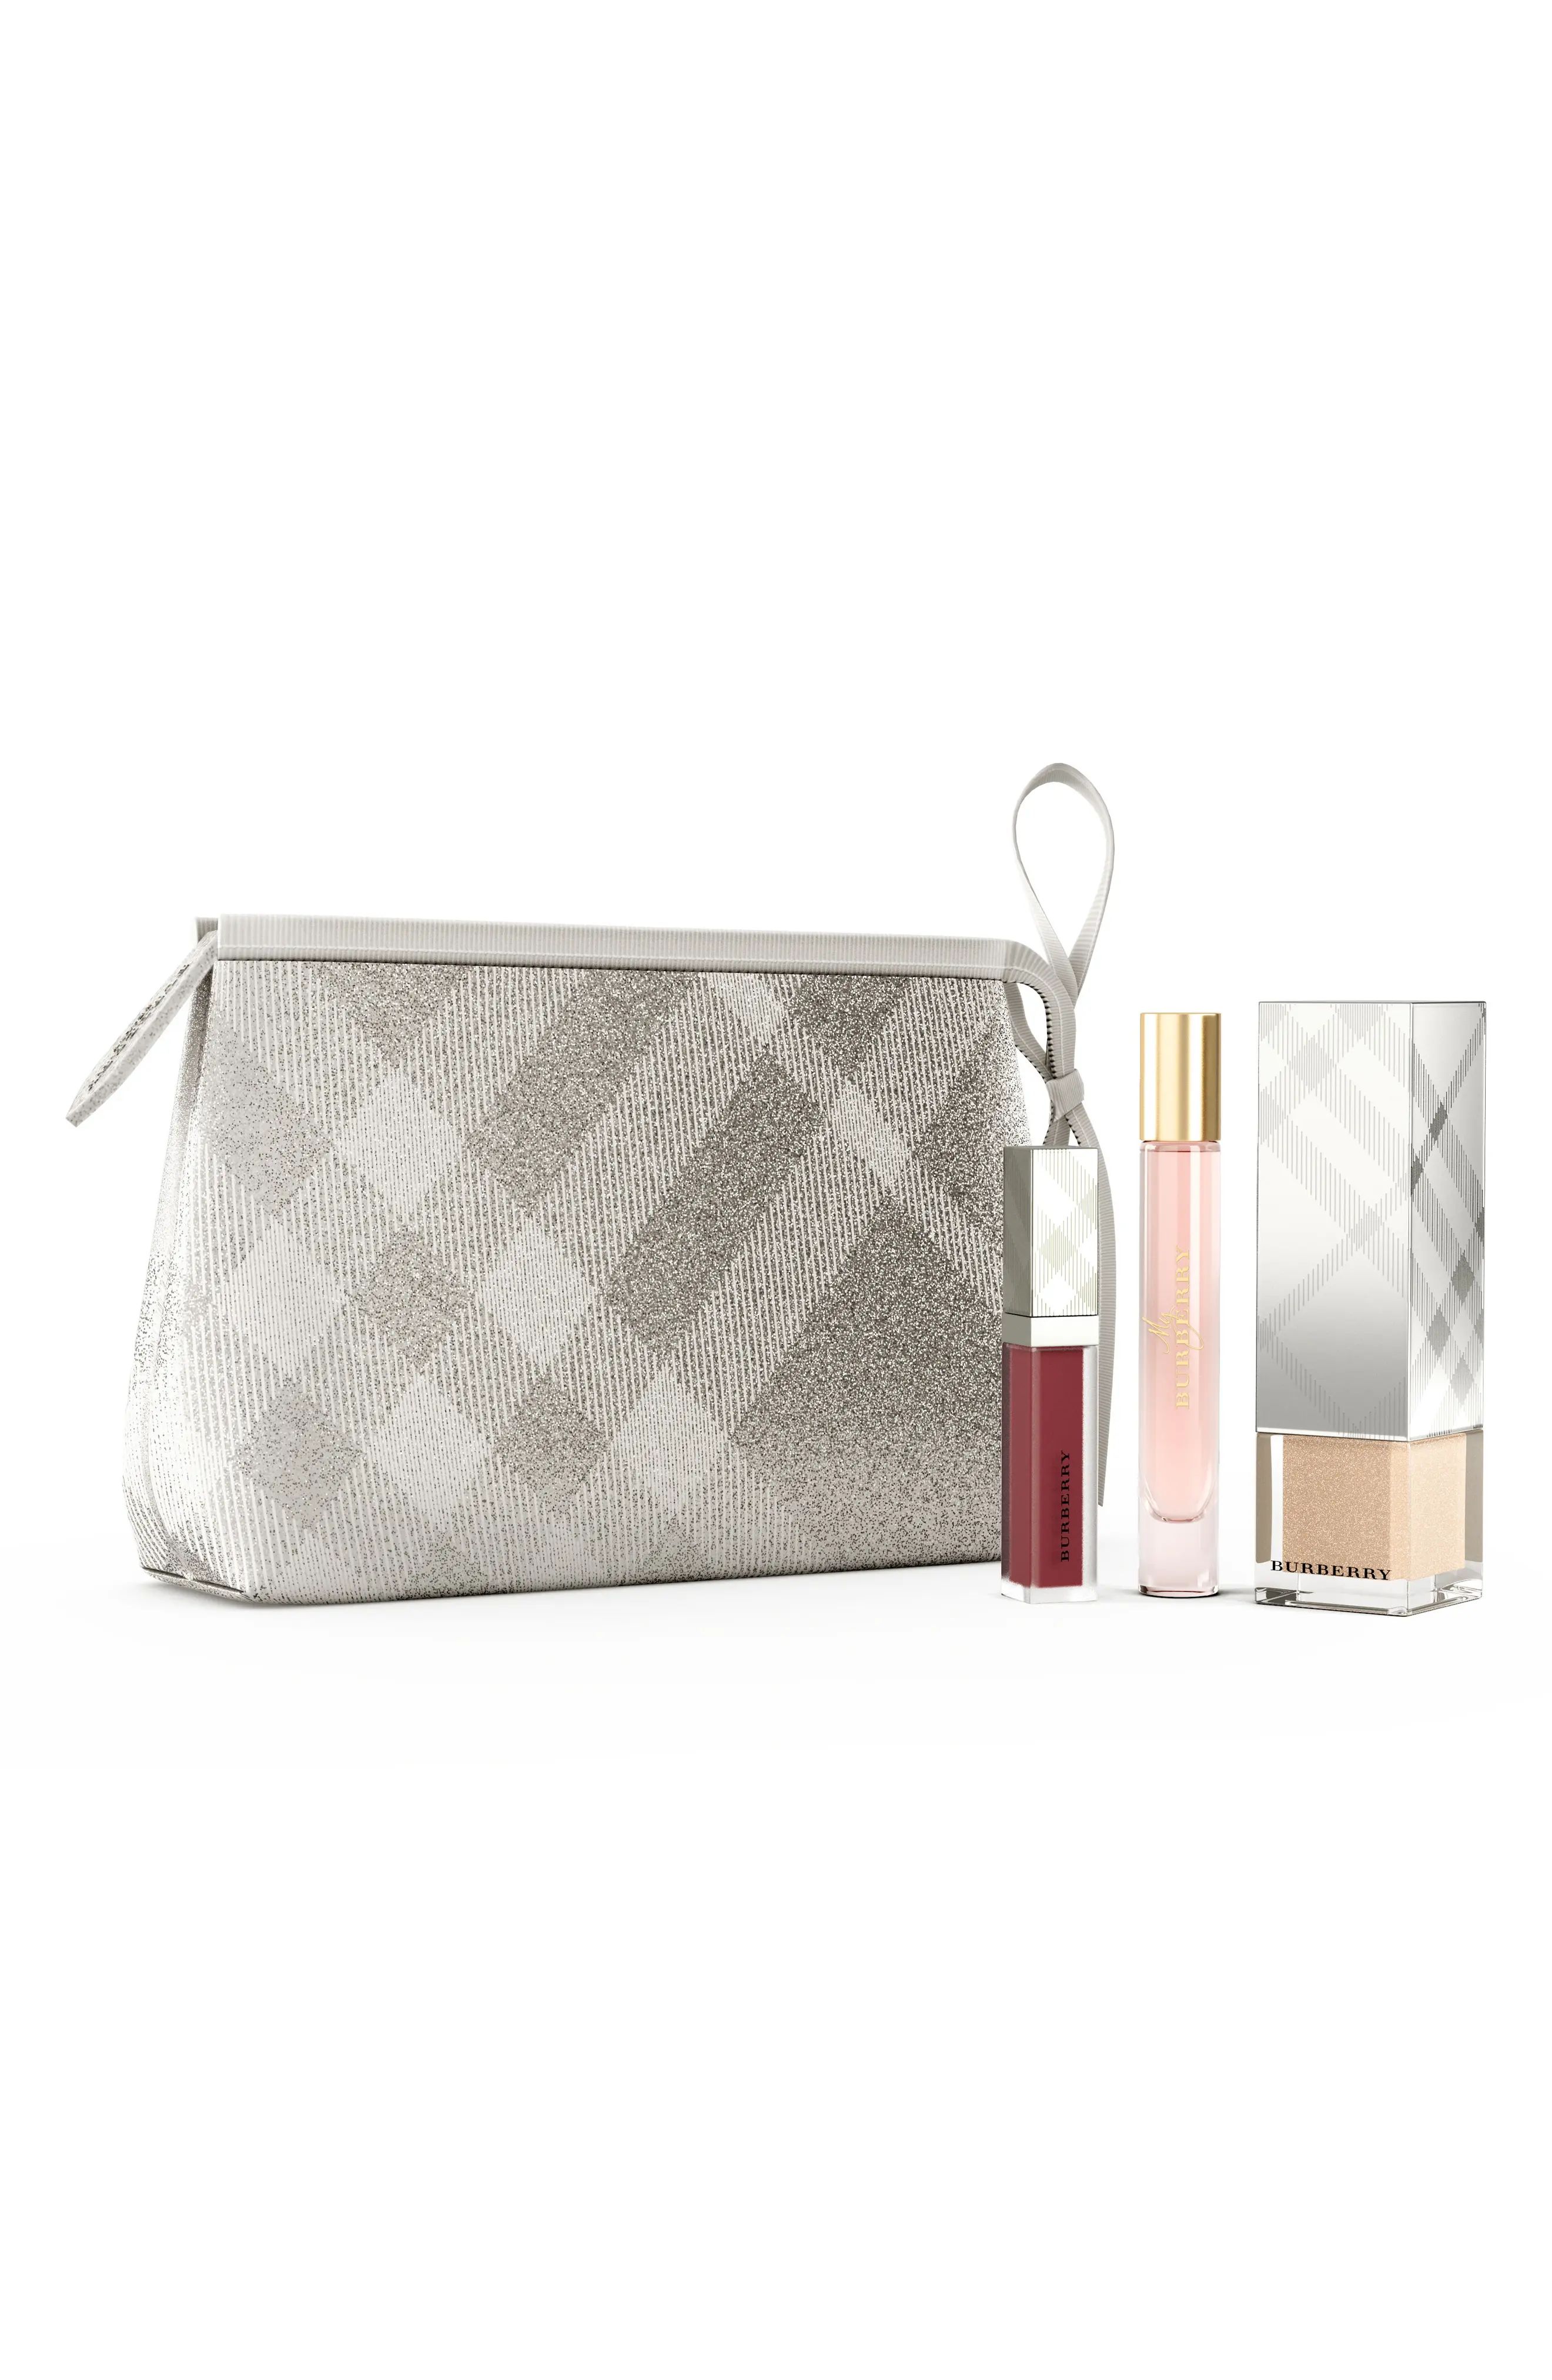 Burberry Beauty Festive Beauty Pouch Collection ($77 Value) | Nordstrom